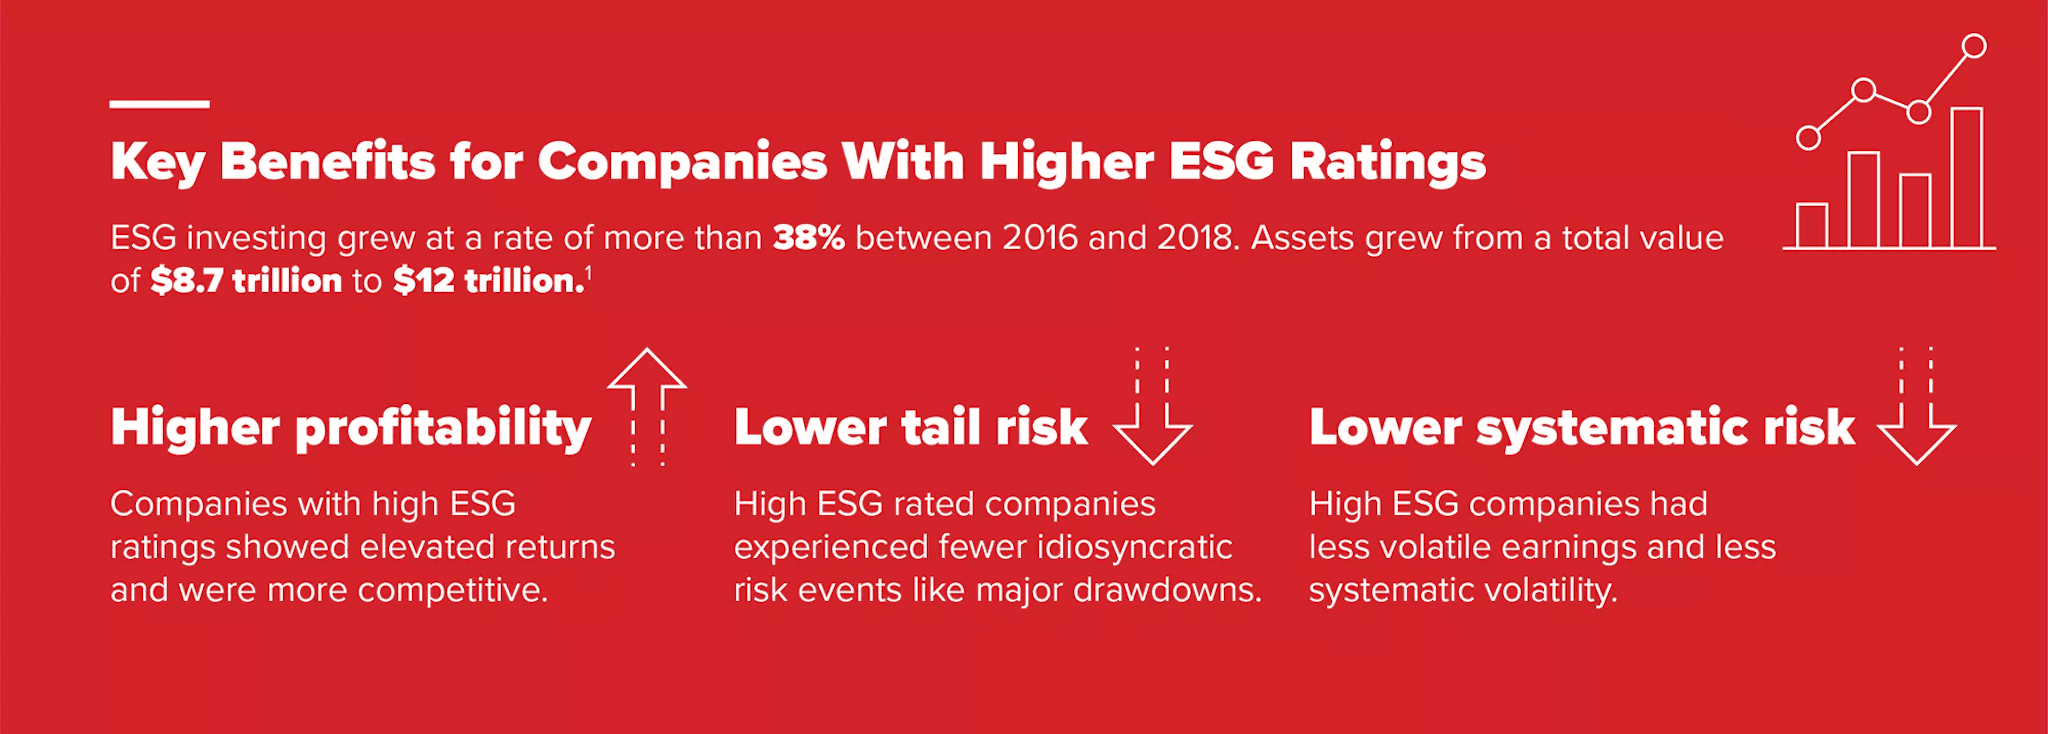 Key benefits for companies with higher ESG ratings: ESG investing grew at a rate of more than 35% between 2016 and 2018.